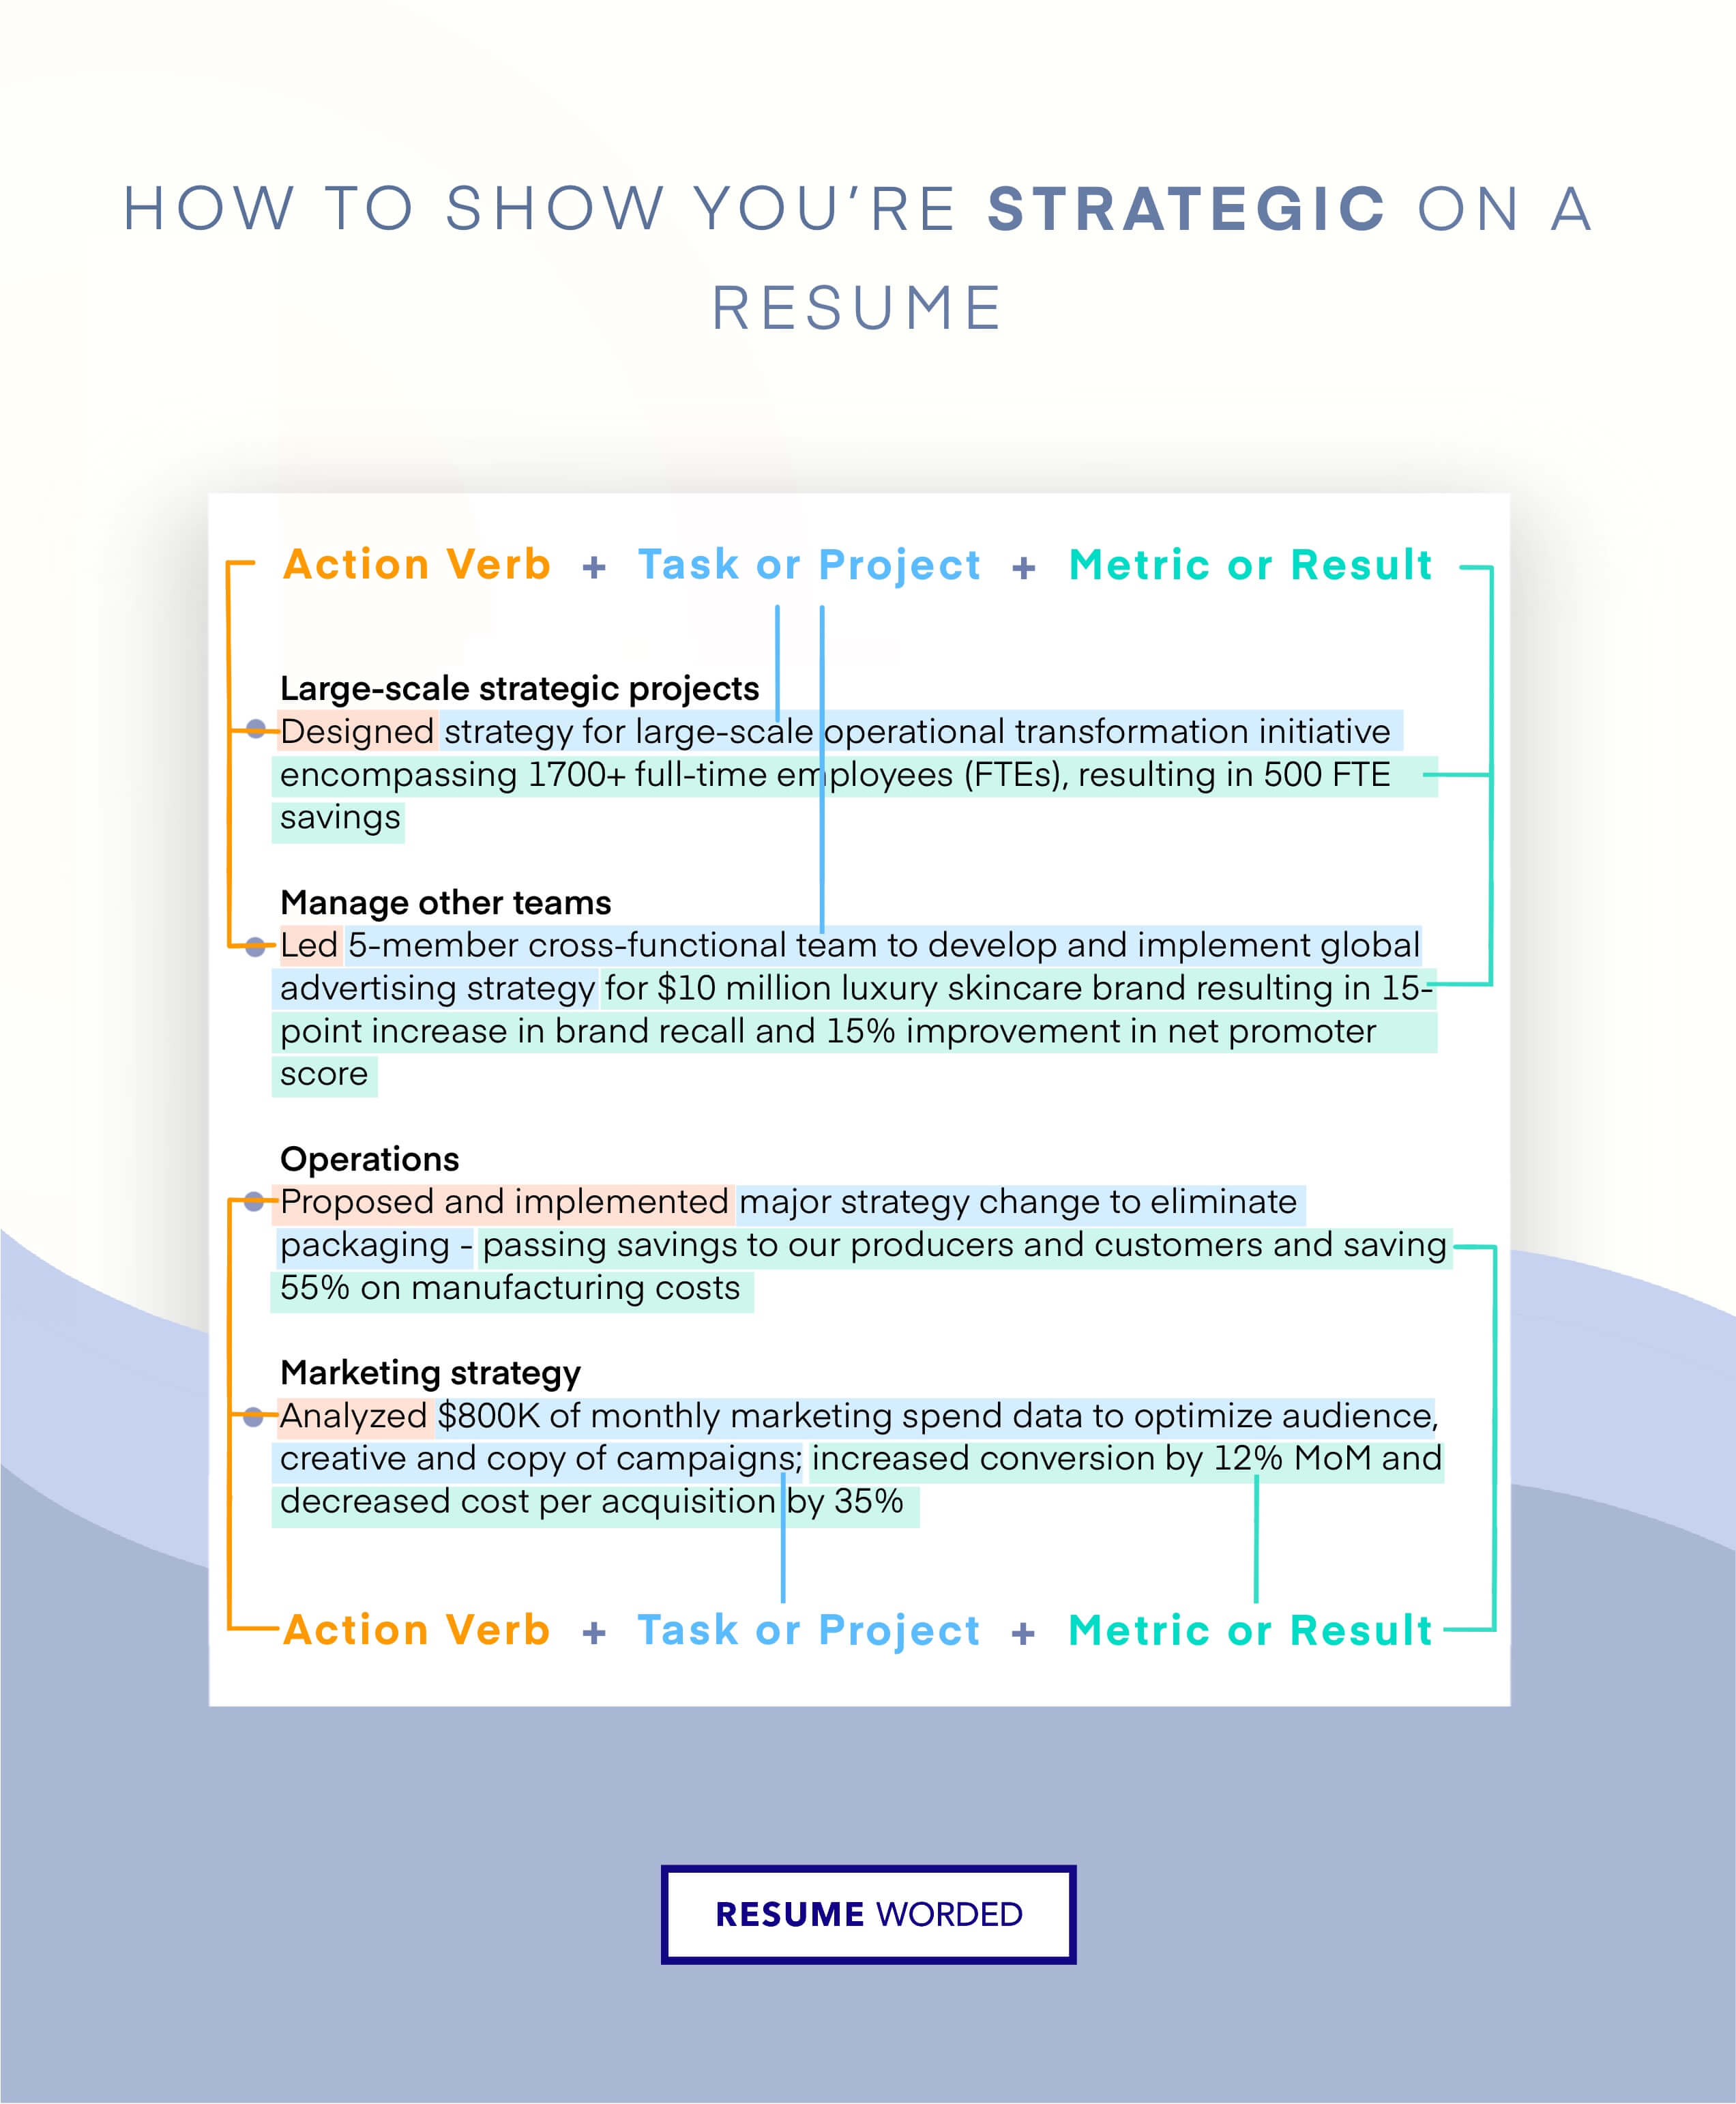 Showcase risk management strategy - Cyber Security Manager  CV